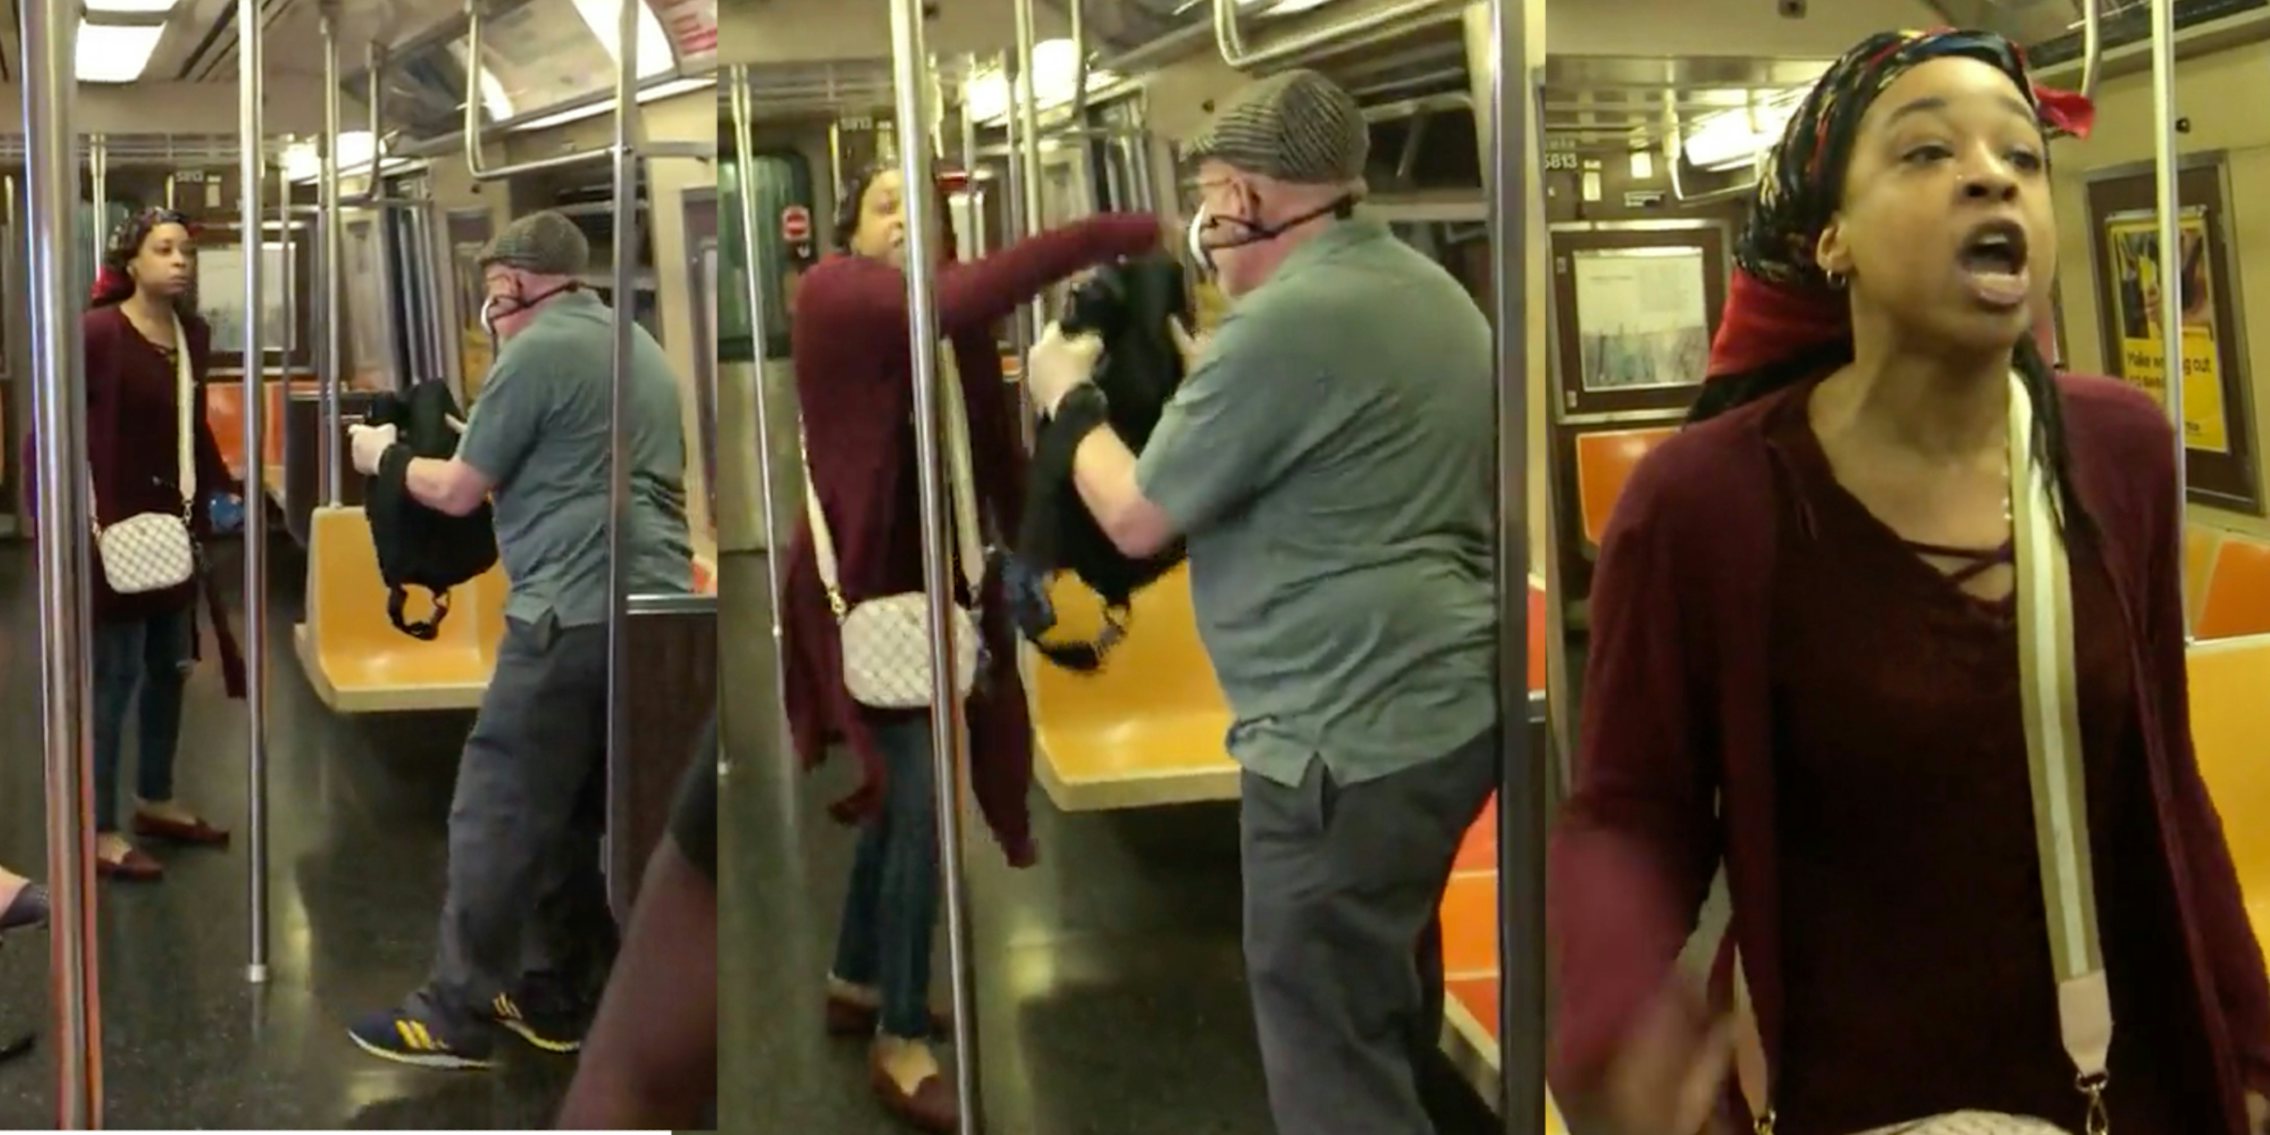 A woman assaults an old man on a train over a mask dispute